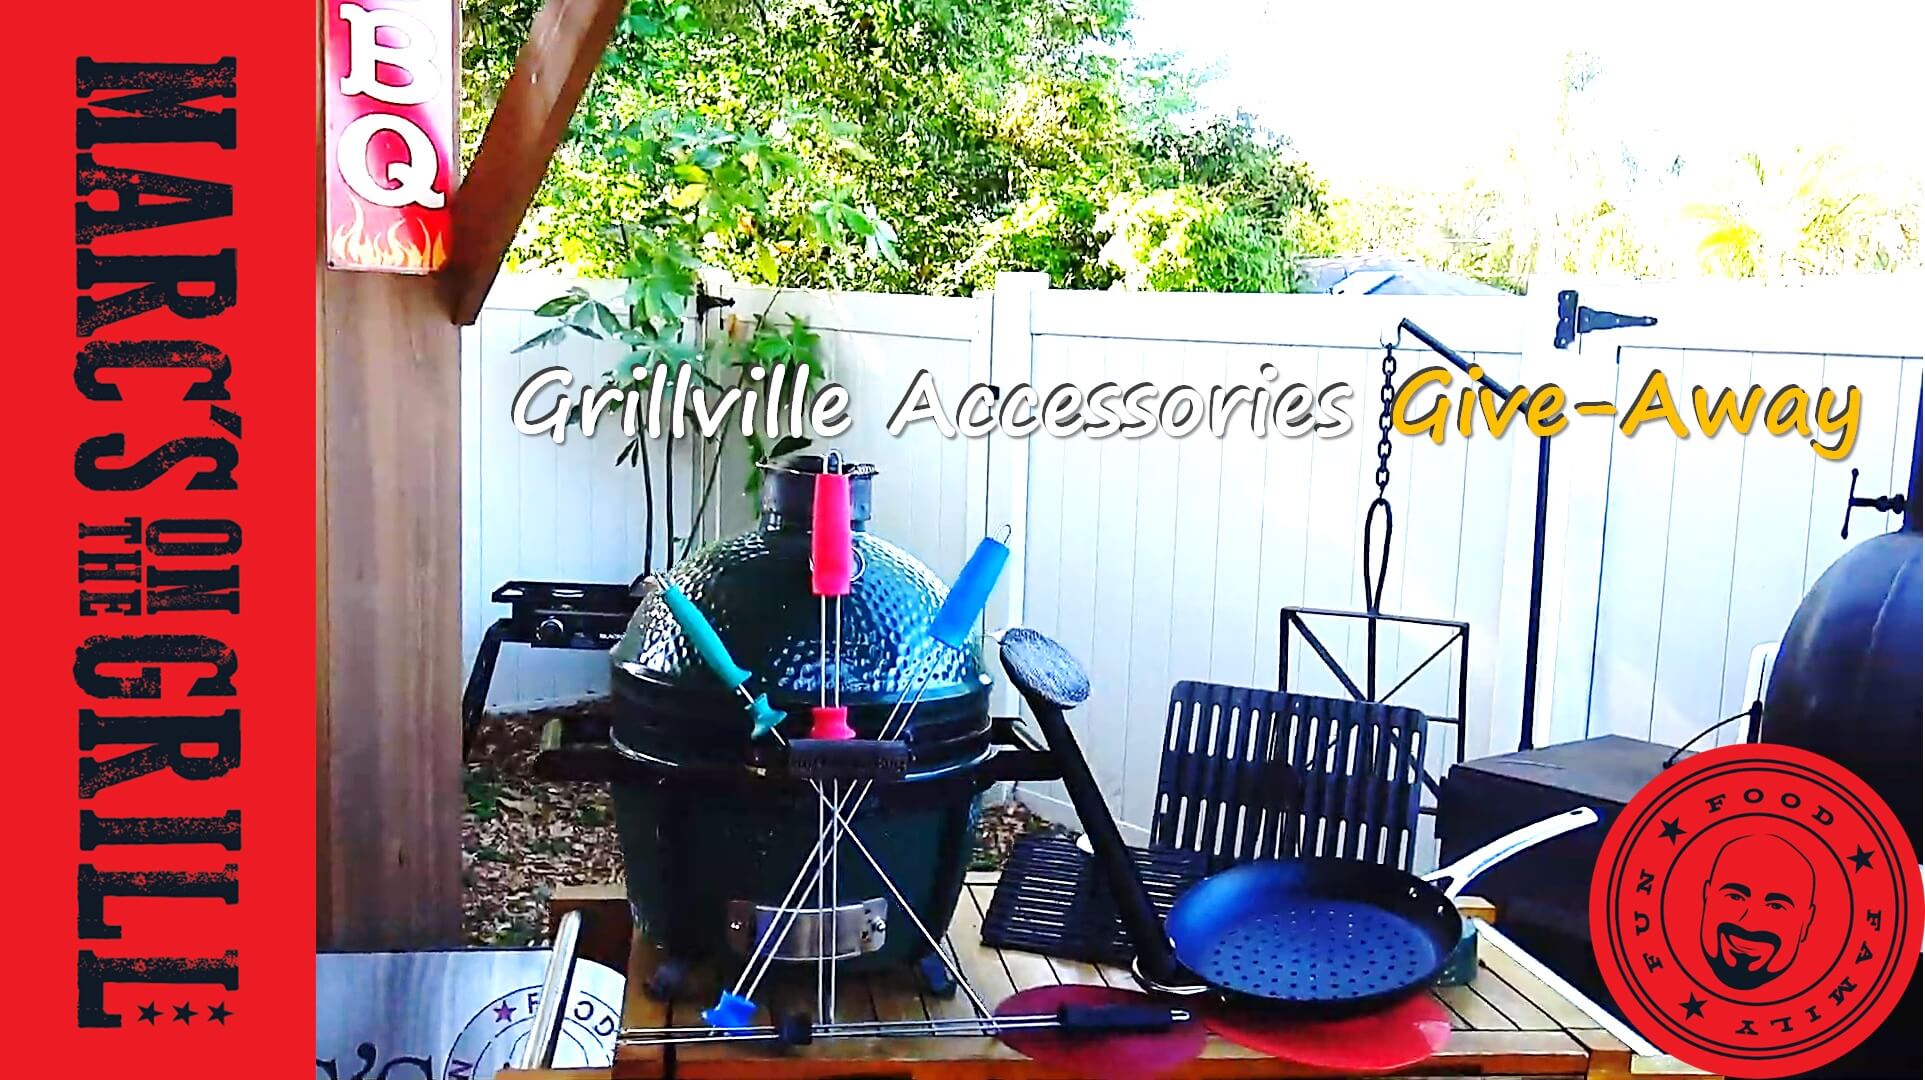 Participate in the challenge to win a chance for a full set of Grilling Accessories from Grillville